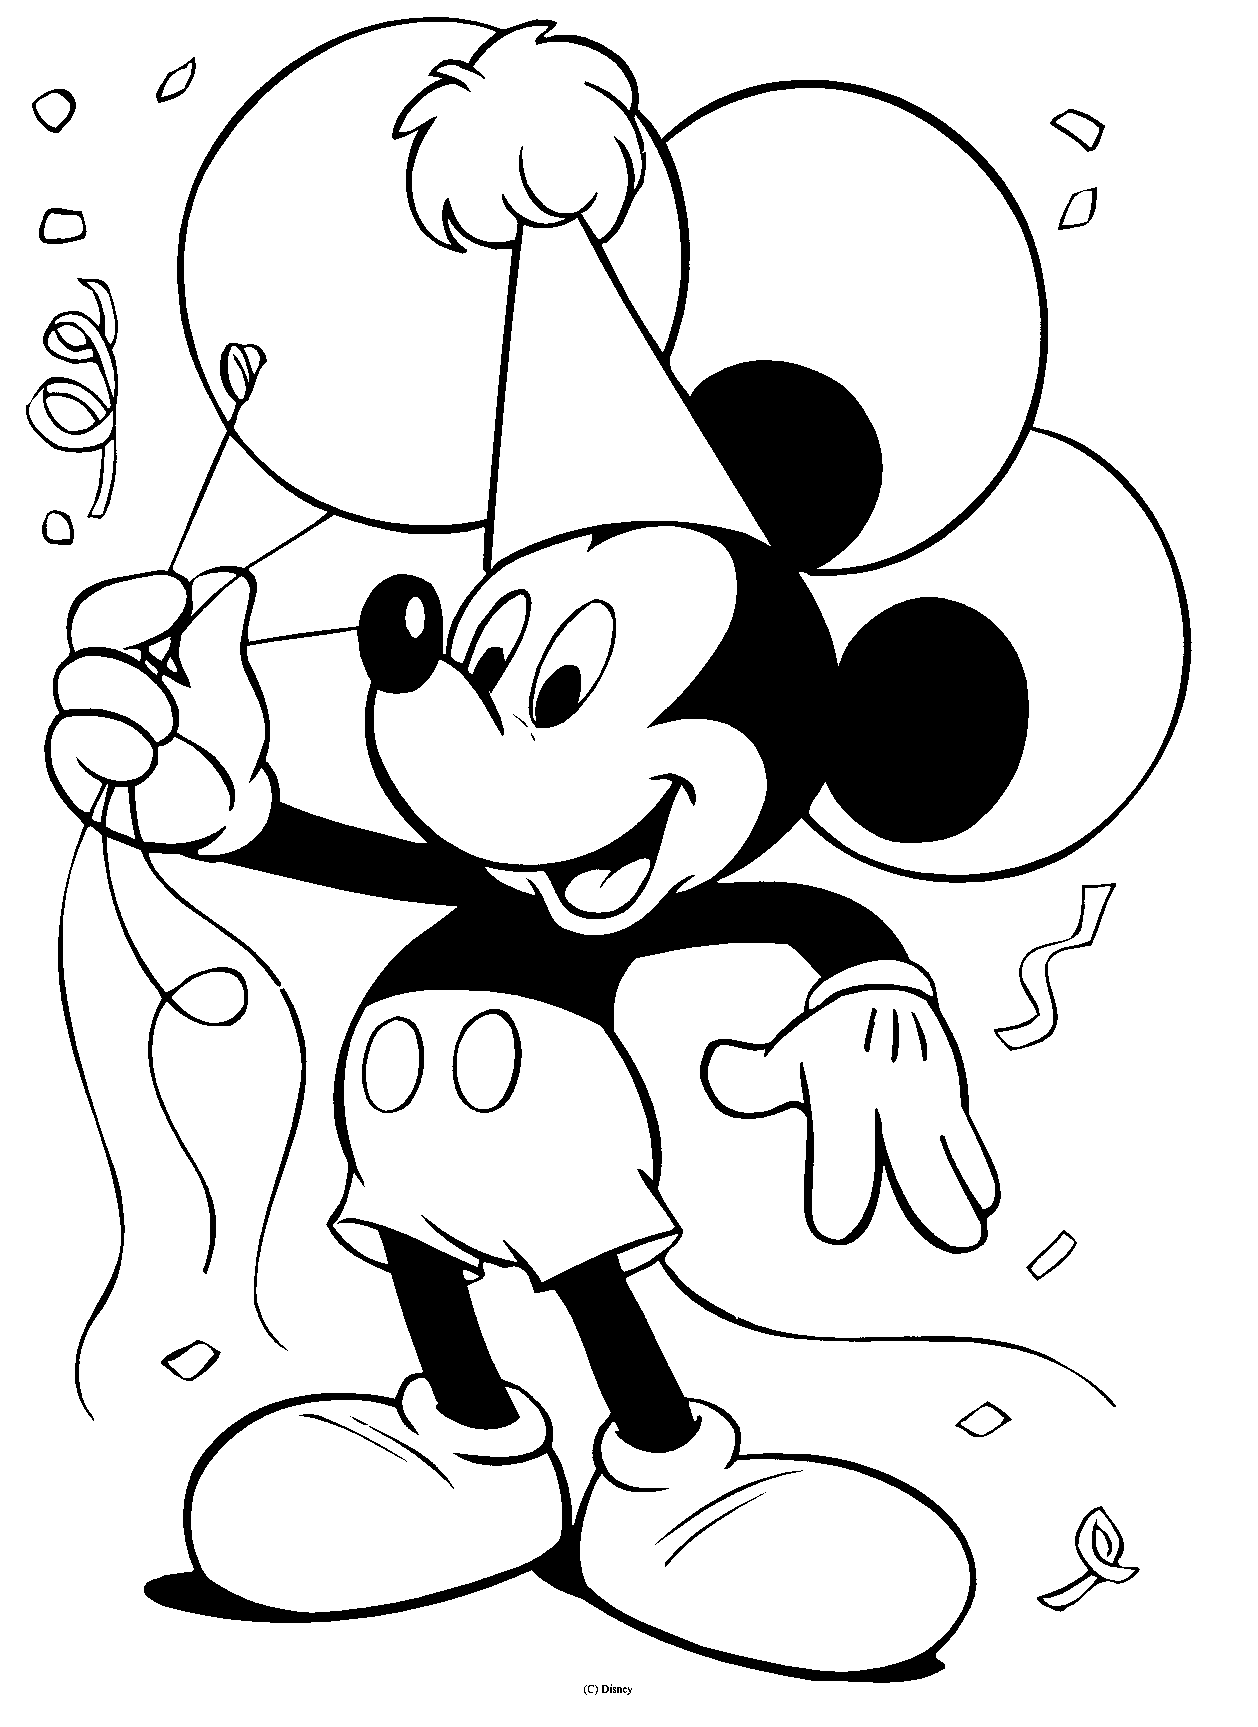 Mickey mouse  black and white mickey mouse clip art free black and white clipartfox 4